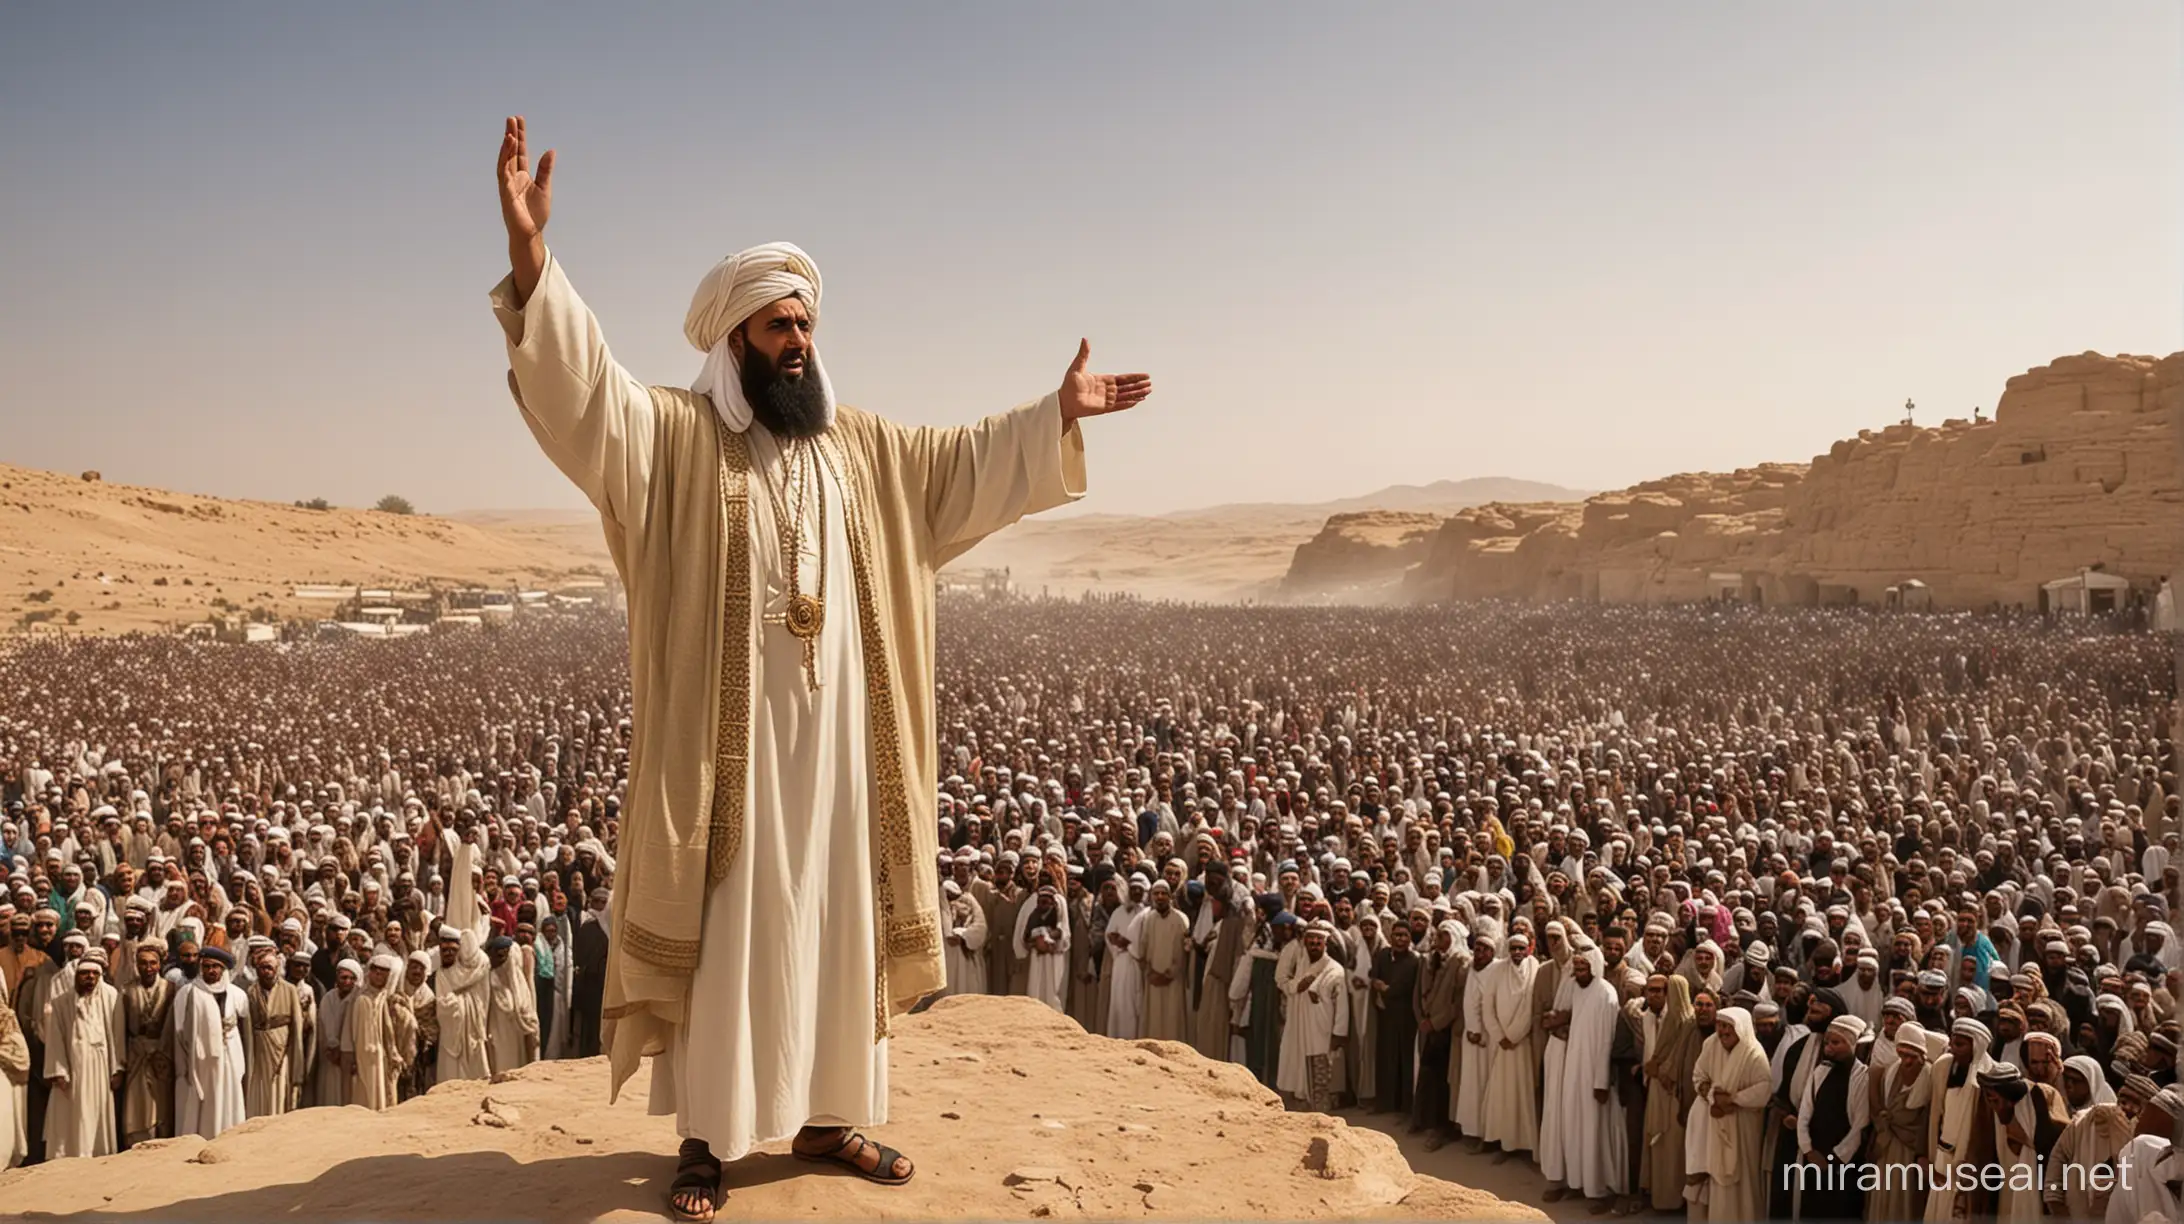 Prophet Saleh (عليه السلام) preaching to the Thamud people: This could show Prophet Saleh standing before a crowd of Thamud people, dressed in garments of the time period. He could be raising his hand in a gesture of preaching, with a determined expression on his face. The Thamud people could be depicted with a mix of expressions, some interested and some skeptical.